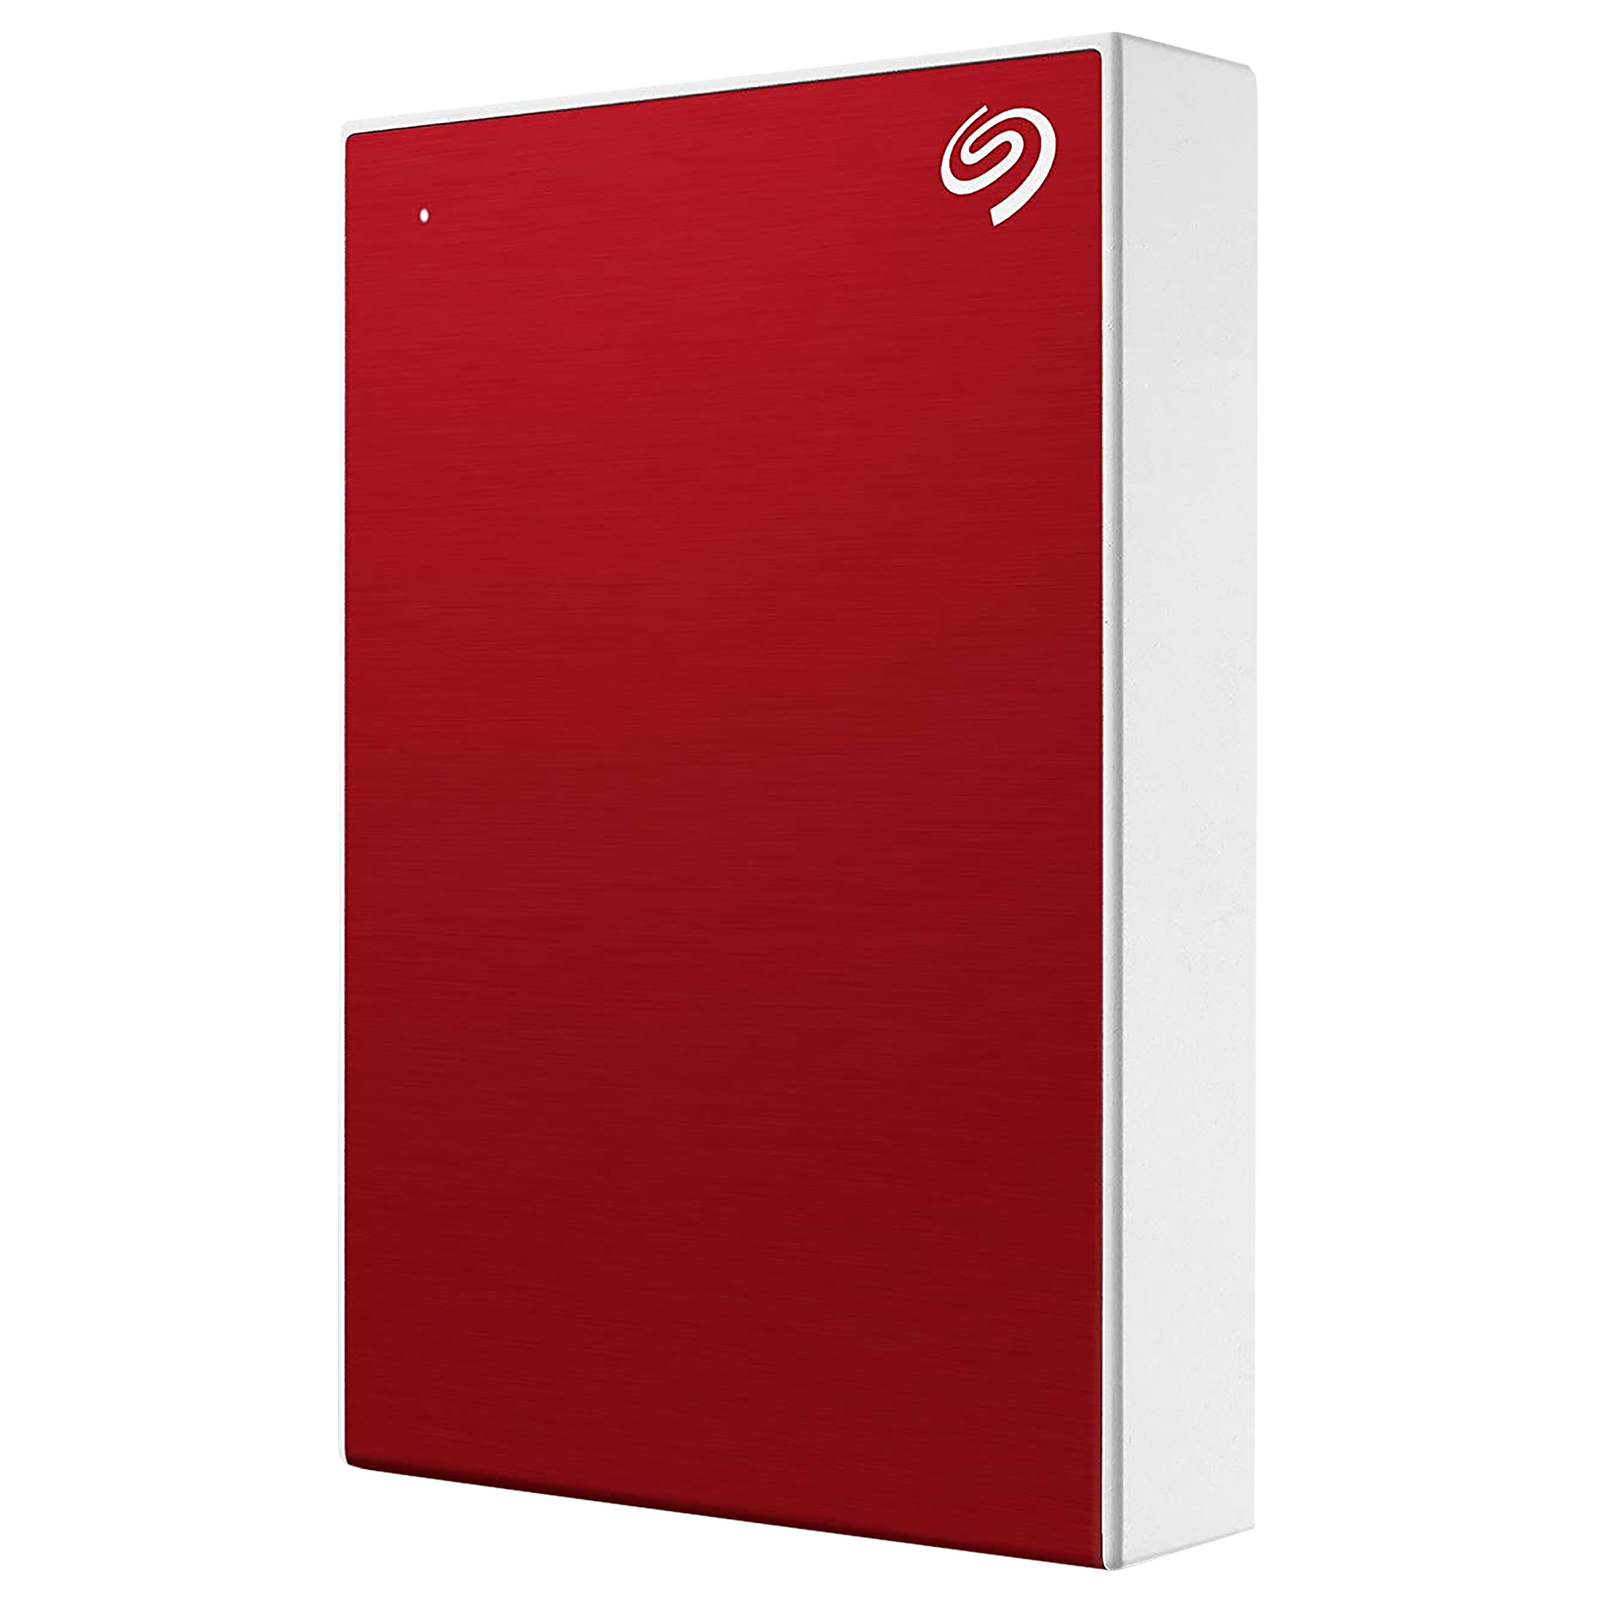 SEAGATE One Touch 4TB USB 3.0 Hard Disk Drive (Easy Data Backup, STKZ4000403, Red)